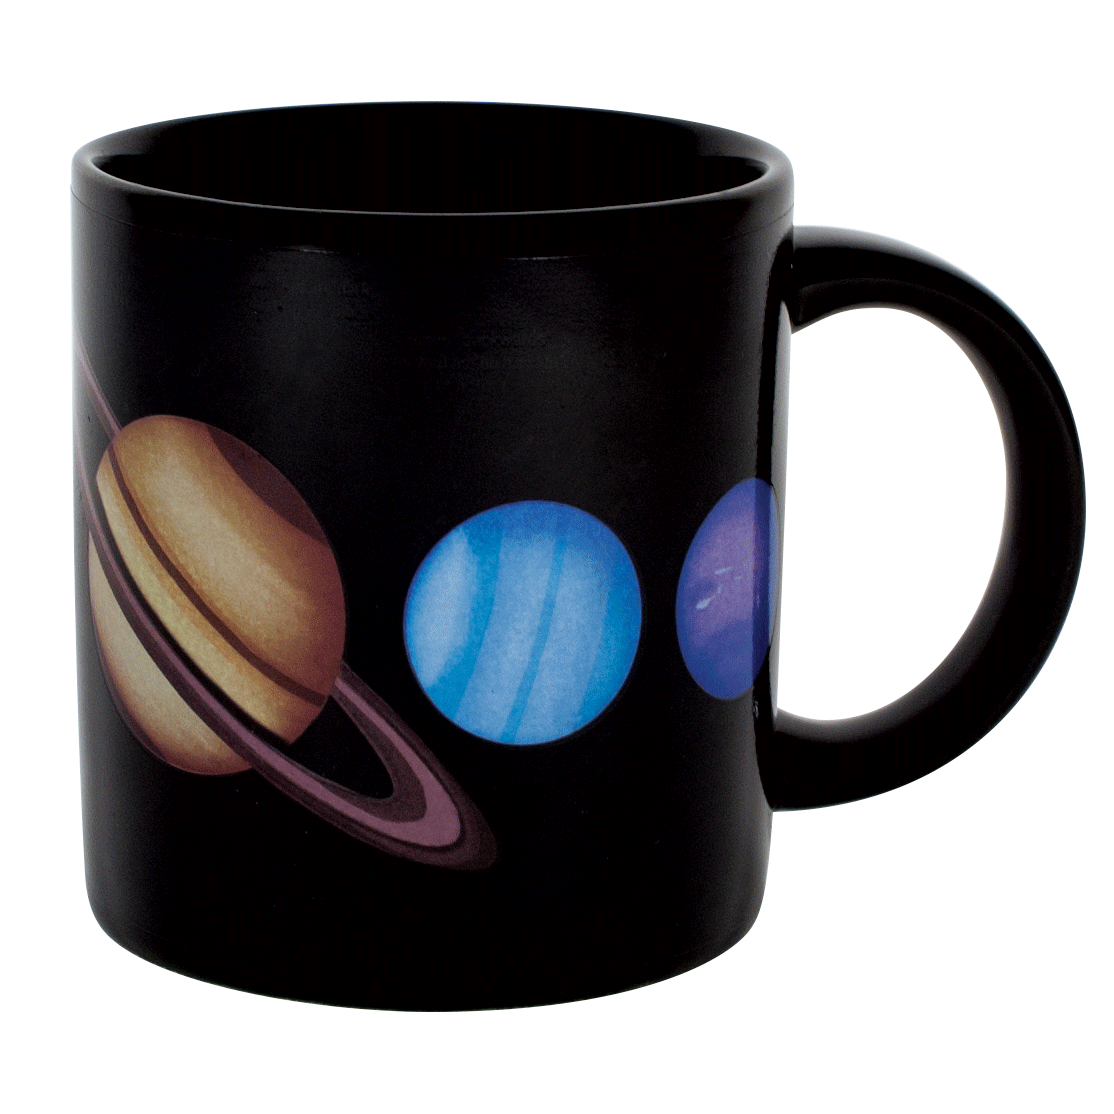 planet mug unemployed philosopher's guild portraits solar system coffee cocoa tea 12oz transforming mugs colorful space unique informative educational facts learning planets